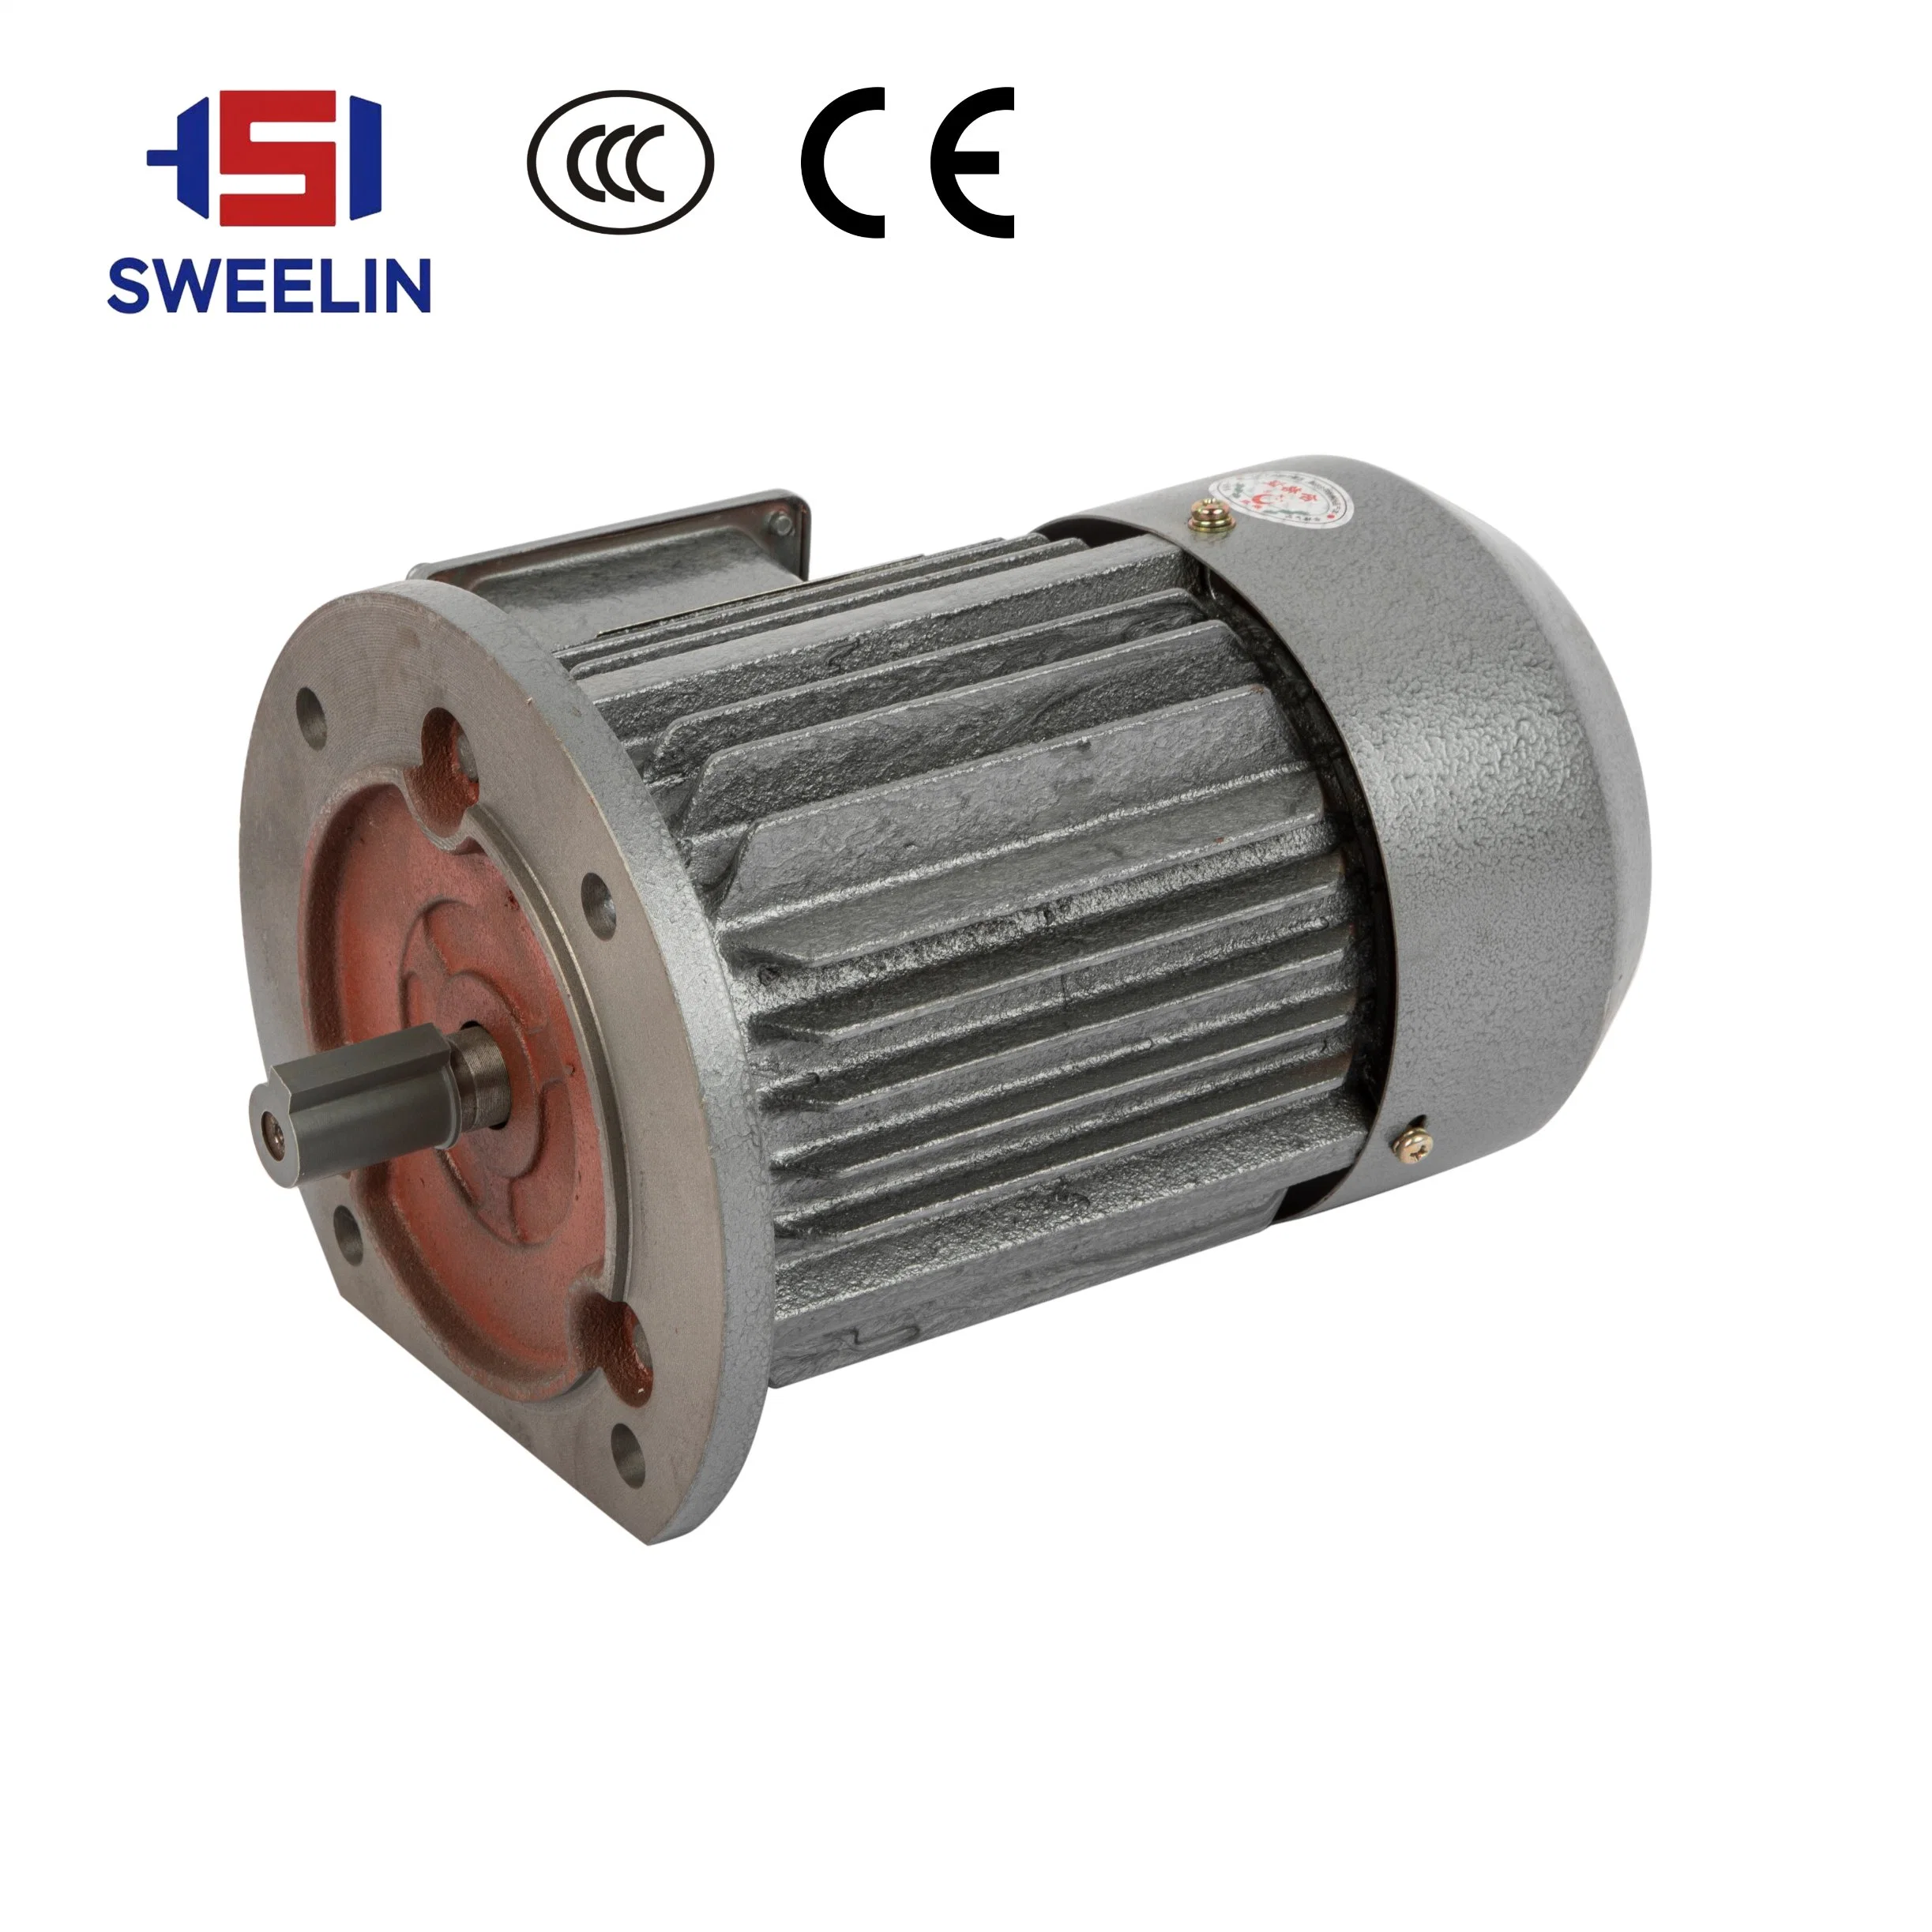 CE Certified Three-Phase Motor Ie2 Ie3 380V Industry High Efficiency Electrical AC Asynchronous Induction Electric Motor with 1-10HP